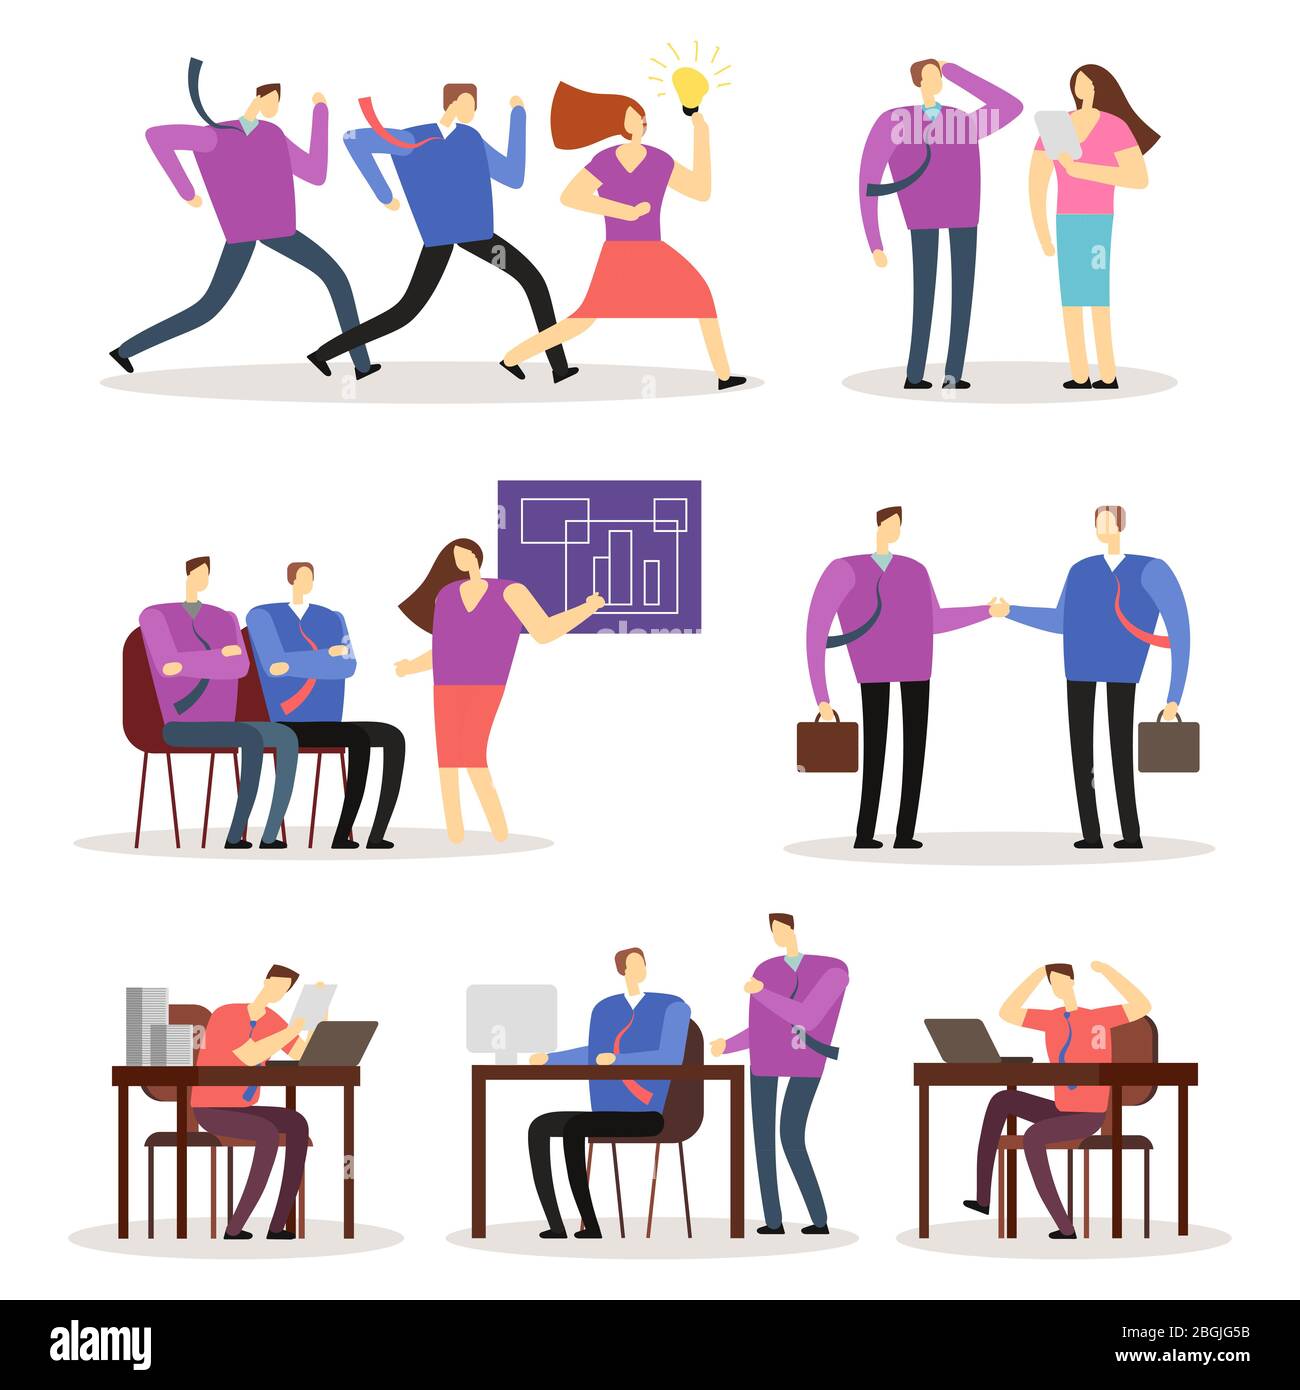 Working people vector cartoon characters. Women and men business people acting in various situation. Group woman and man in office, organization worker illustration Stock Vector